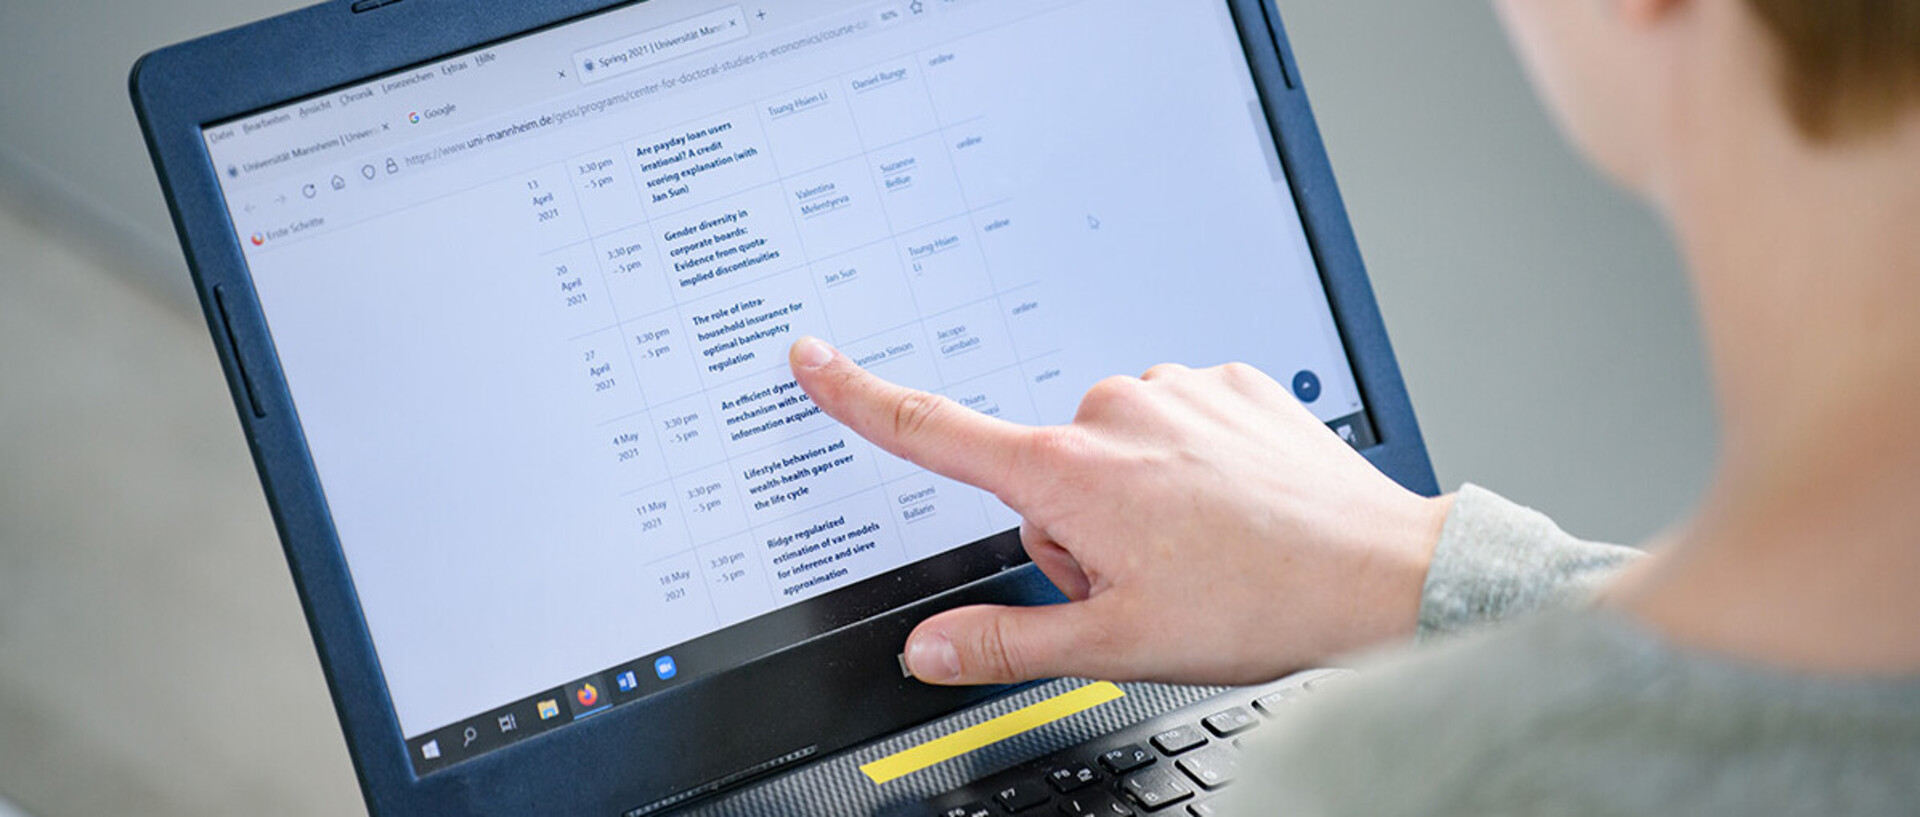 A doctoral student is holding a laptop and is pointing out a course on the screen where the schedule for different doctoral courses can be seen.